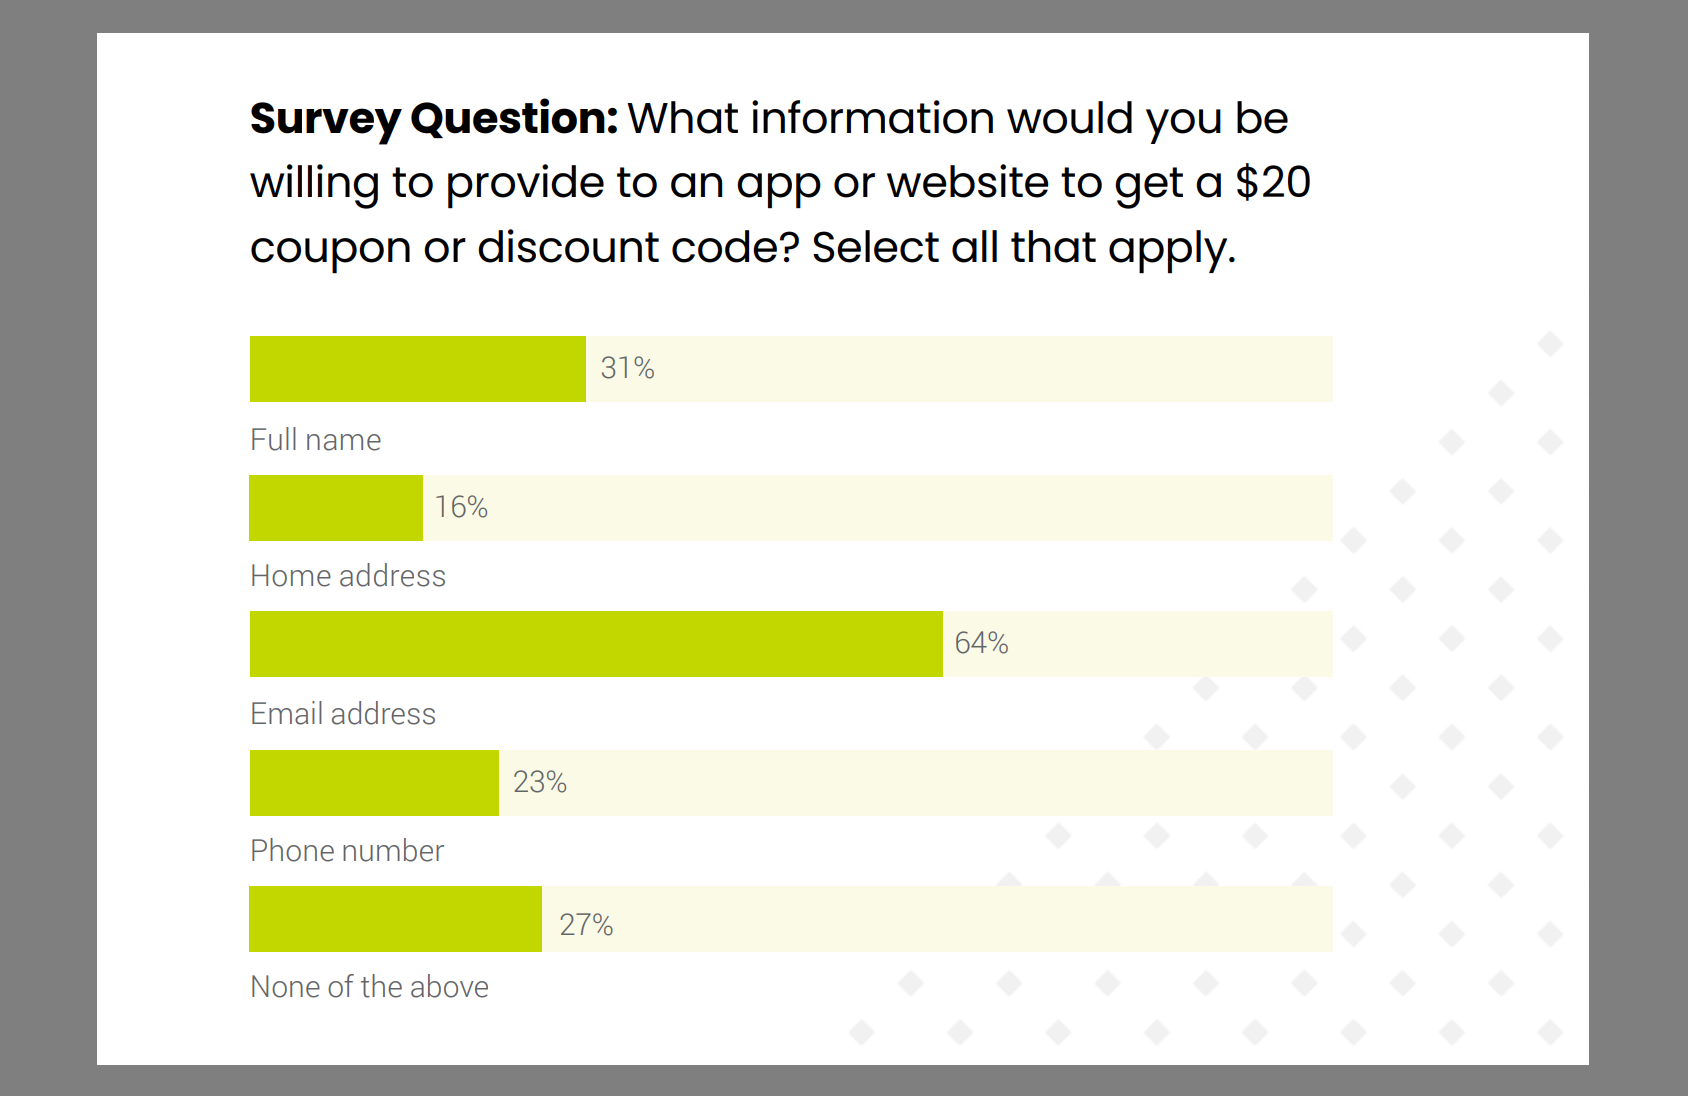 Personal Information US Consumers Would Be Willing to Provide for a $20 Coupon or Discount Code